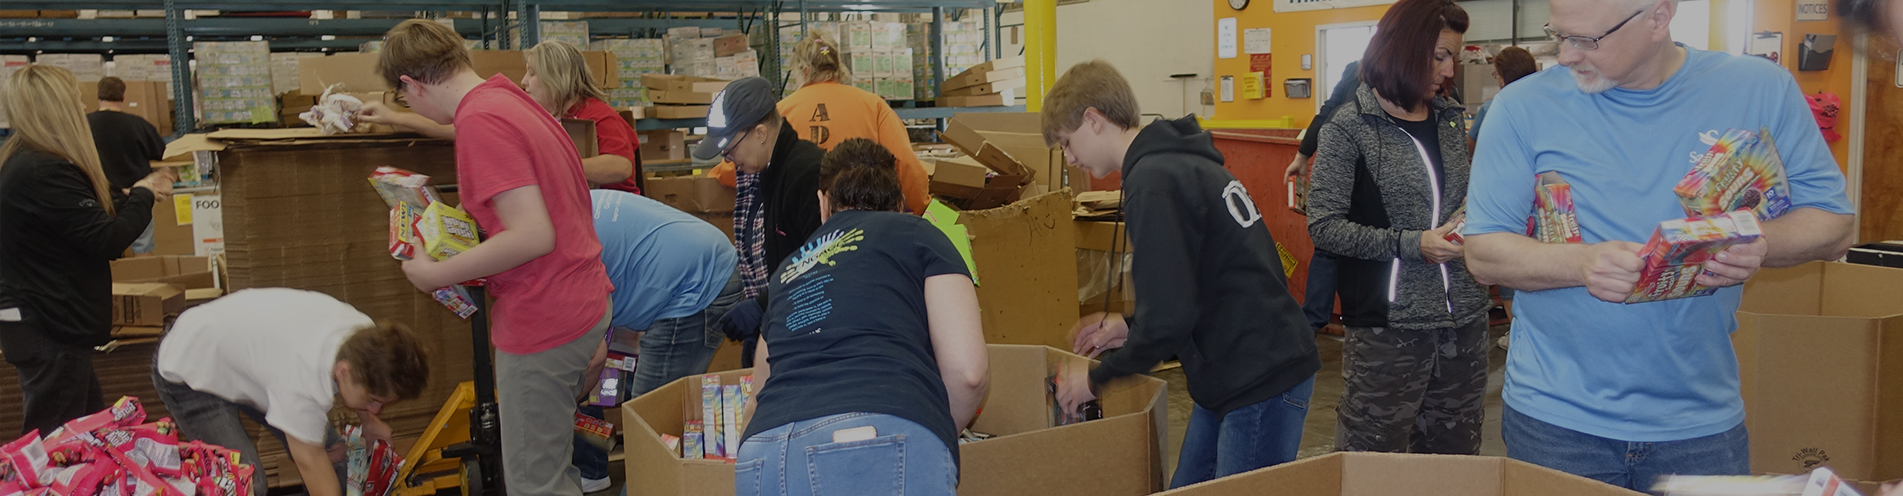 Sagicor Life employees help to pack food boxes at St. Mary's Food Bank in Phoenix